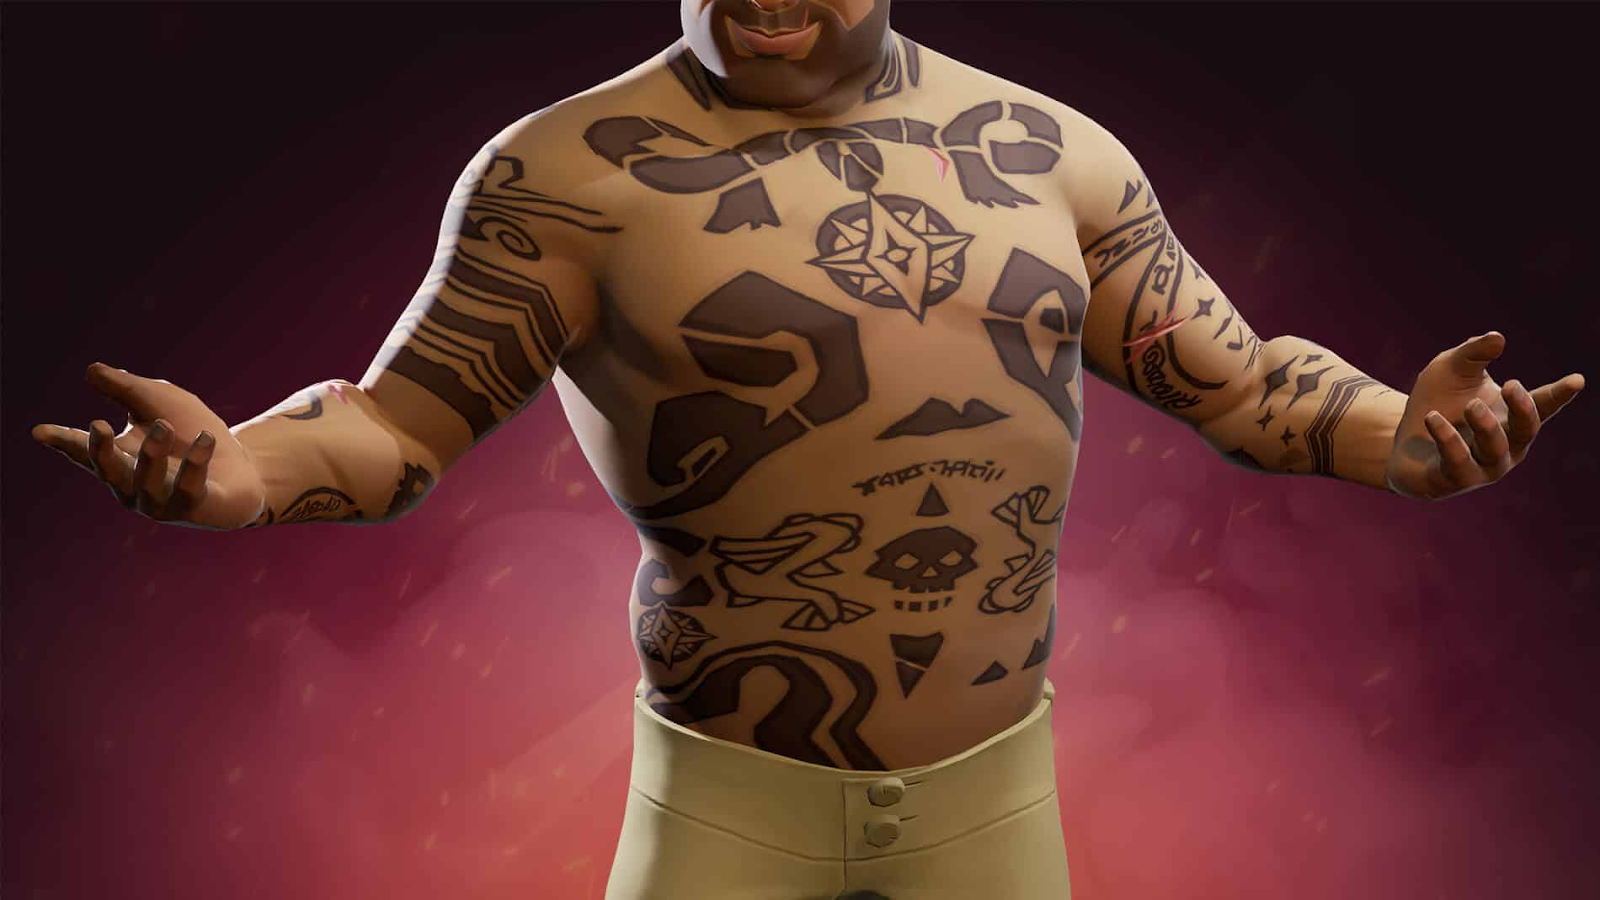 An image of the Umbral tattoo cosmetics set from the game Sea of Thieves. 